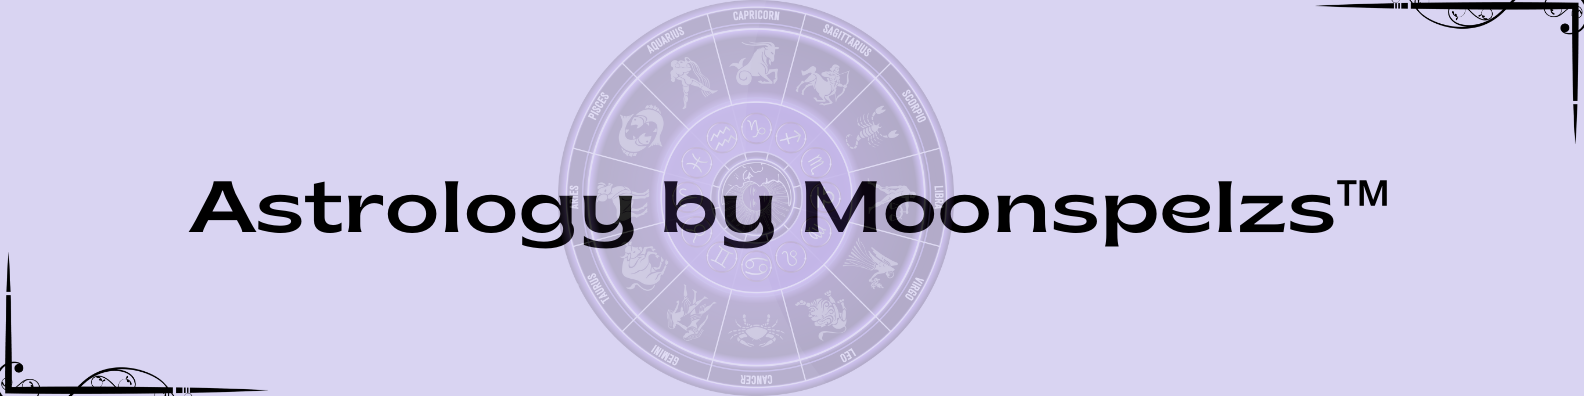 Banner displaying the Astrology by Moonspelzs shop logo